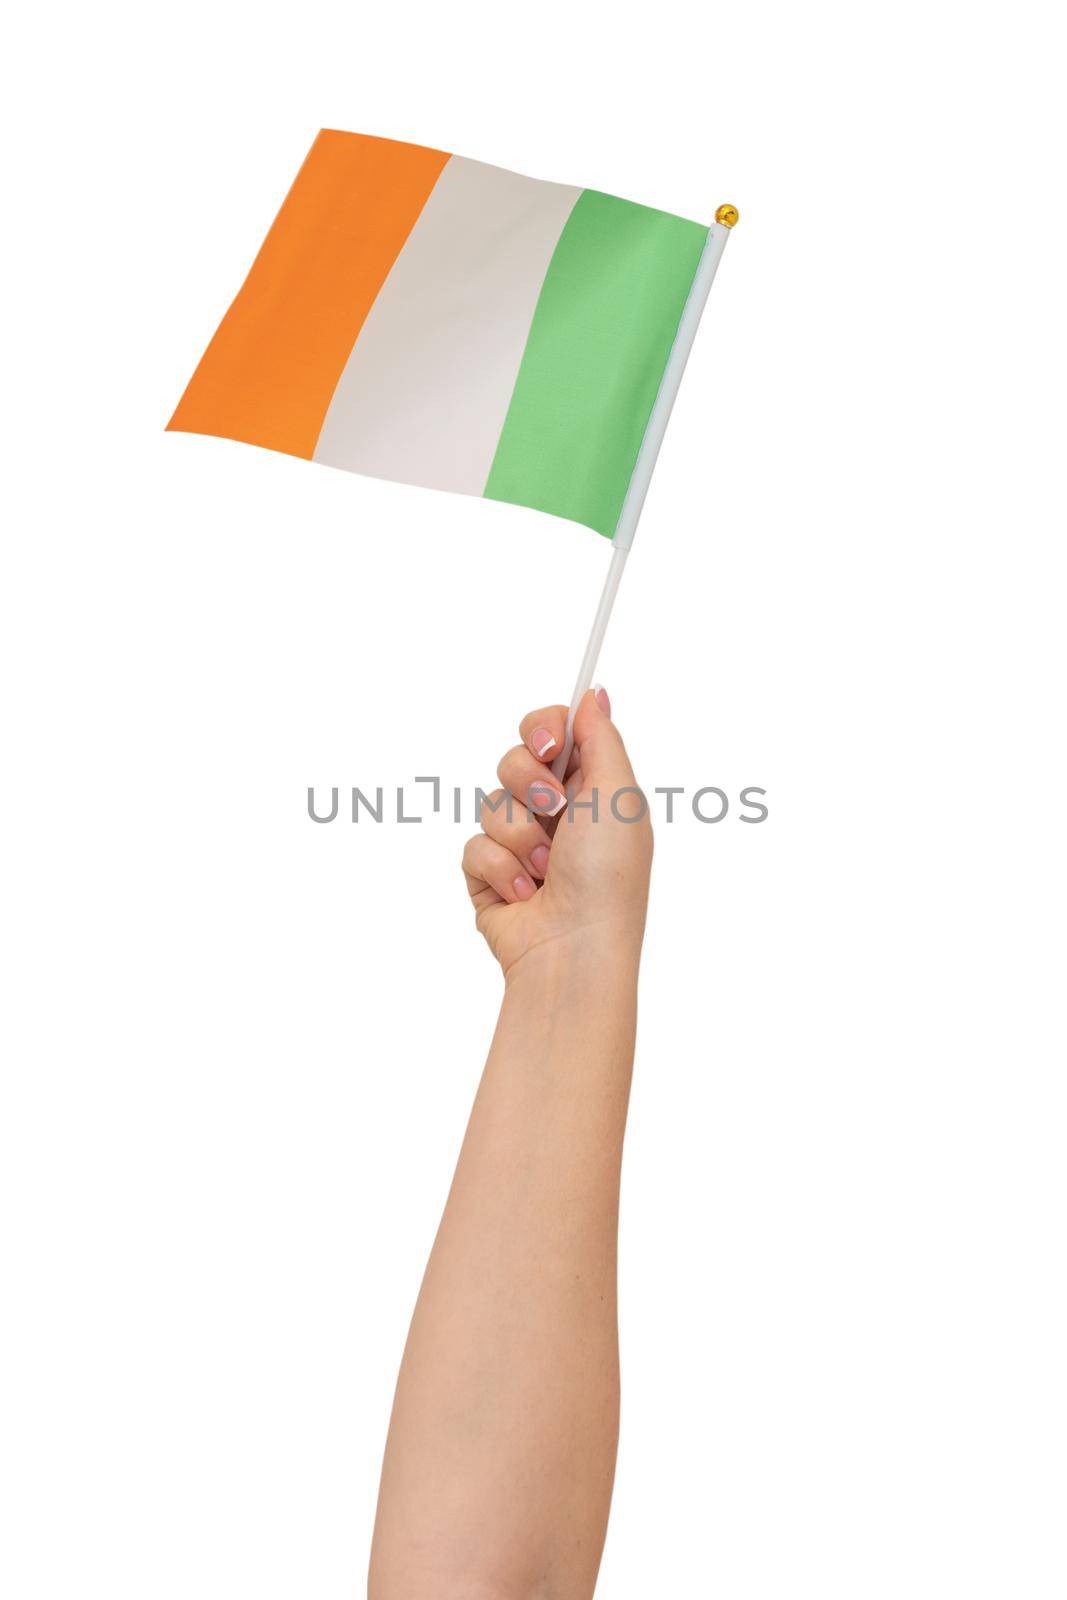 A hand holdiing the flag of Ireland against a white background by Mariakray